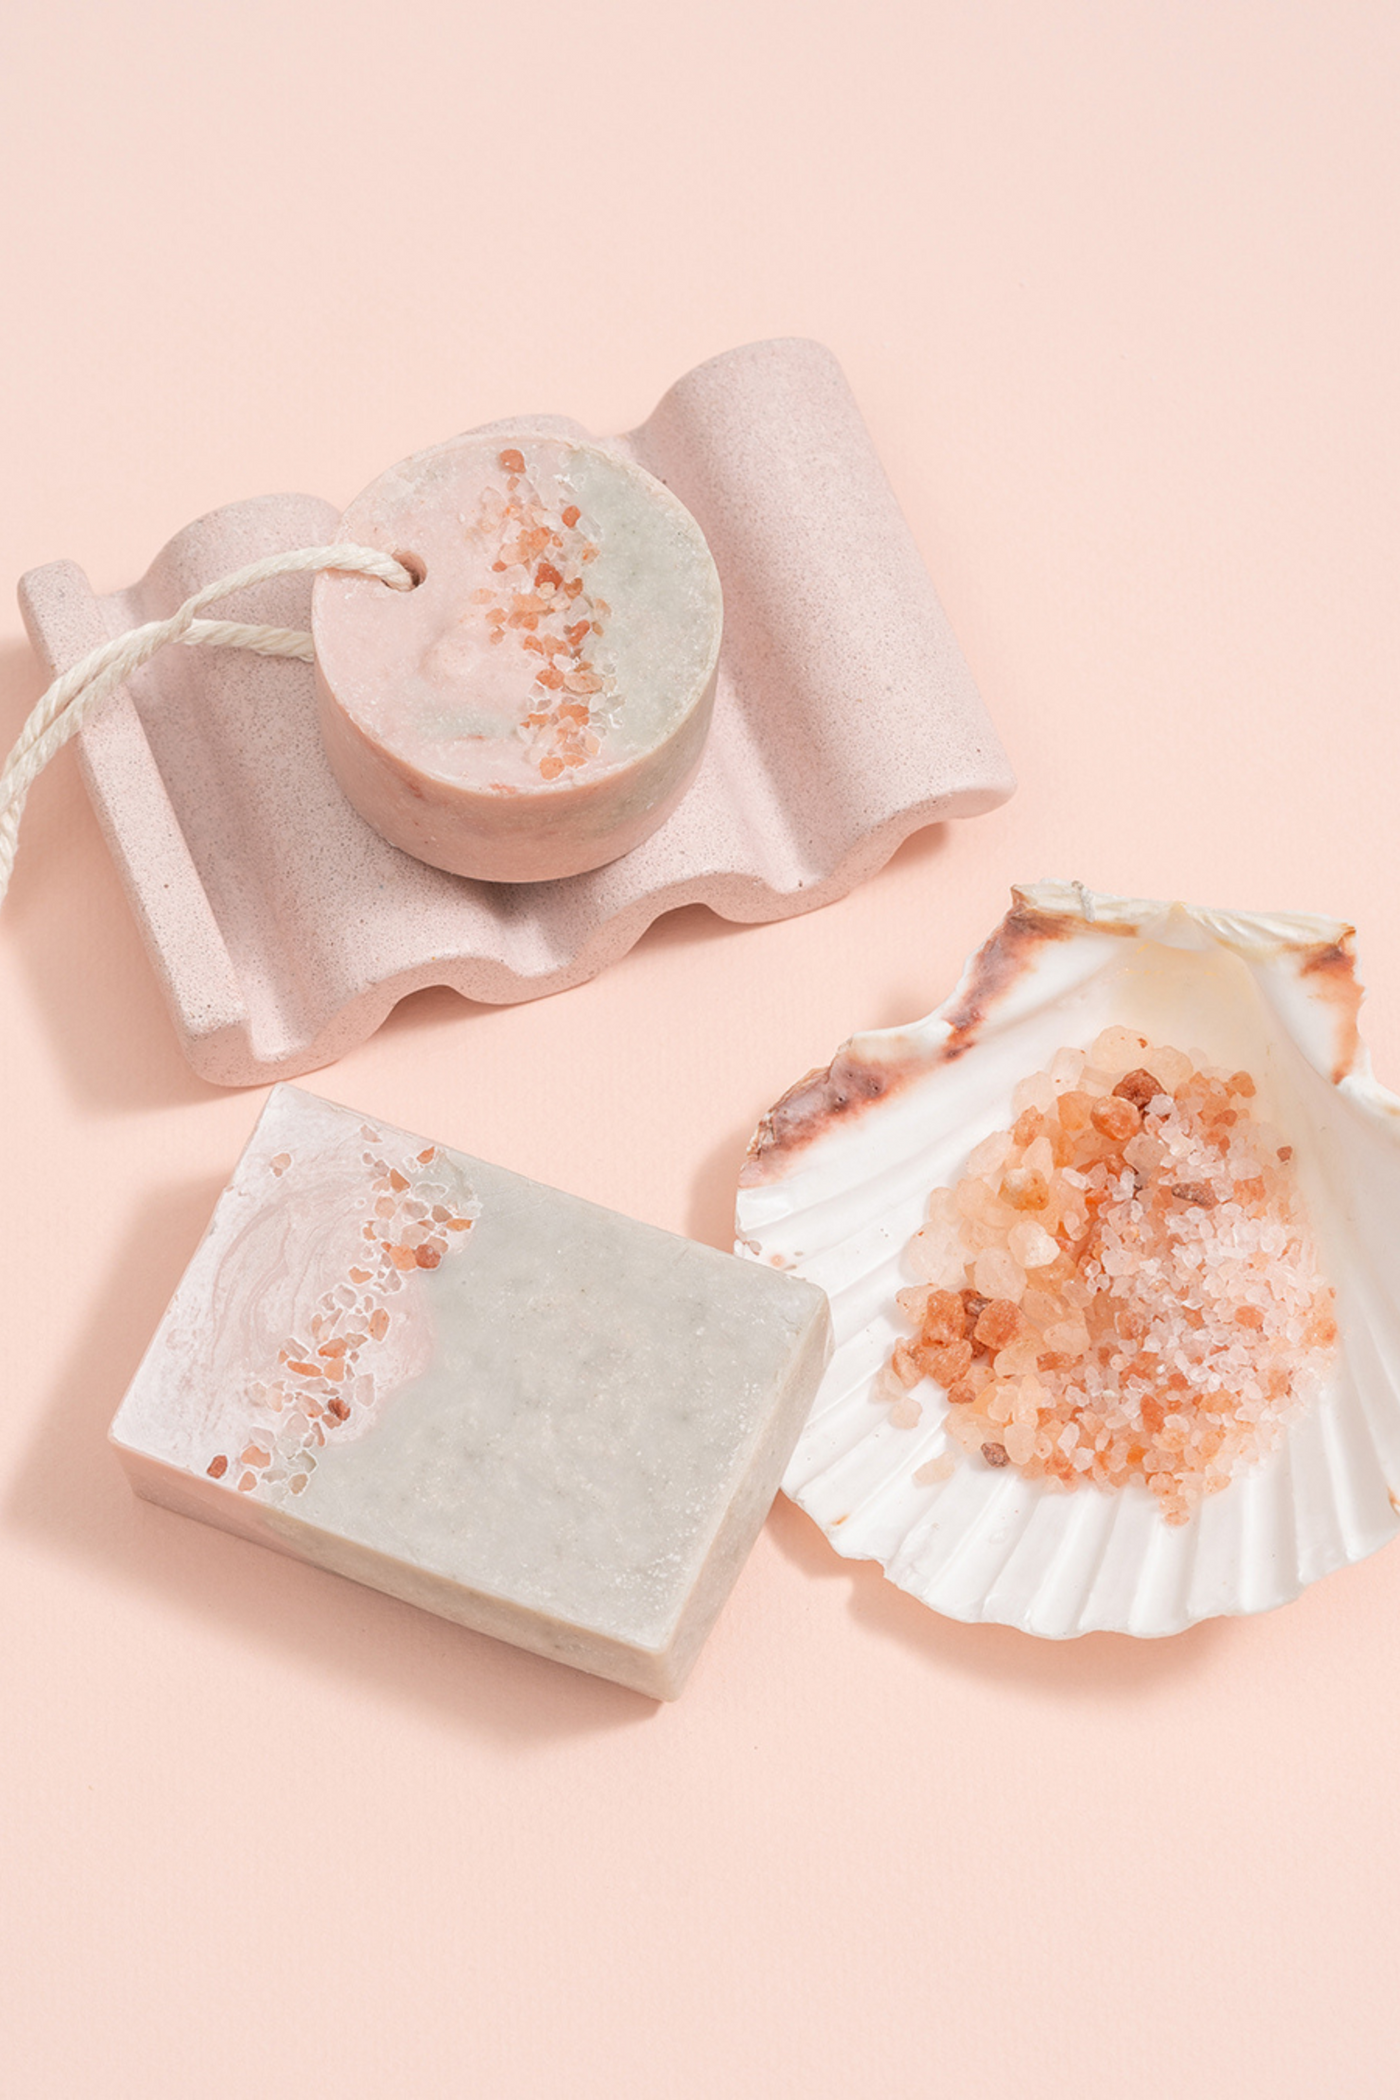 Gentle Mood Pink Salt + Bergamot Simple Soap Bar, available on ZERRIN with free Singapore shipping